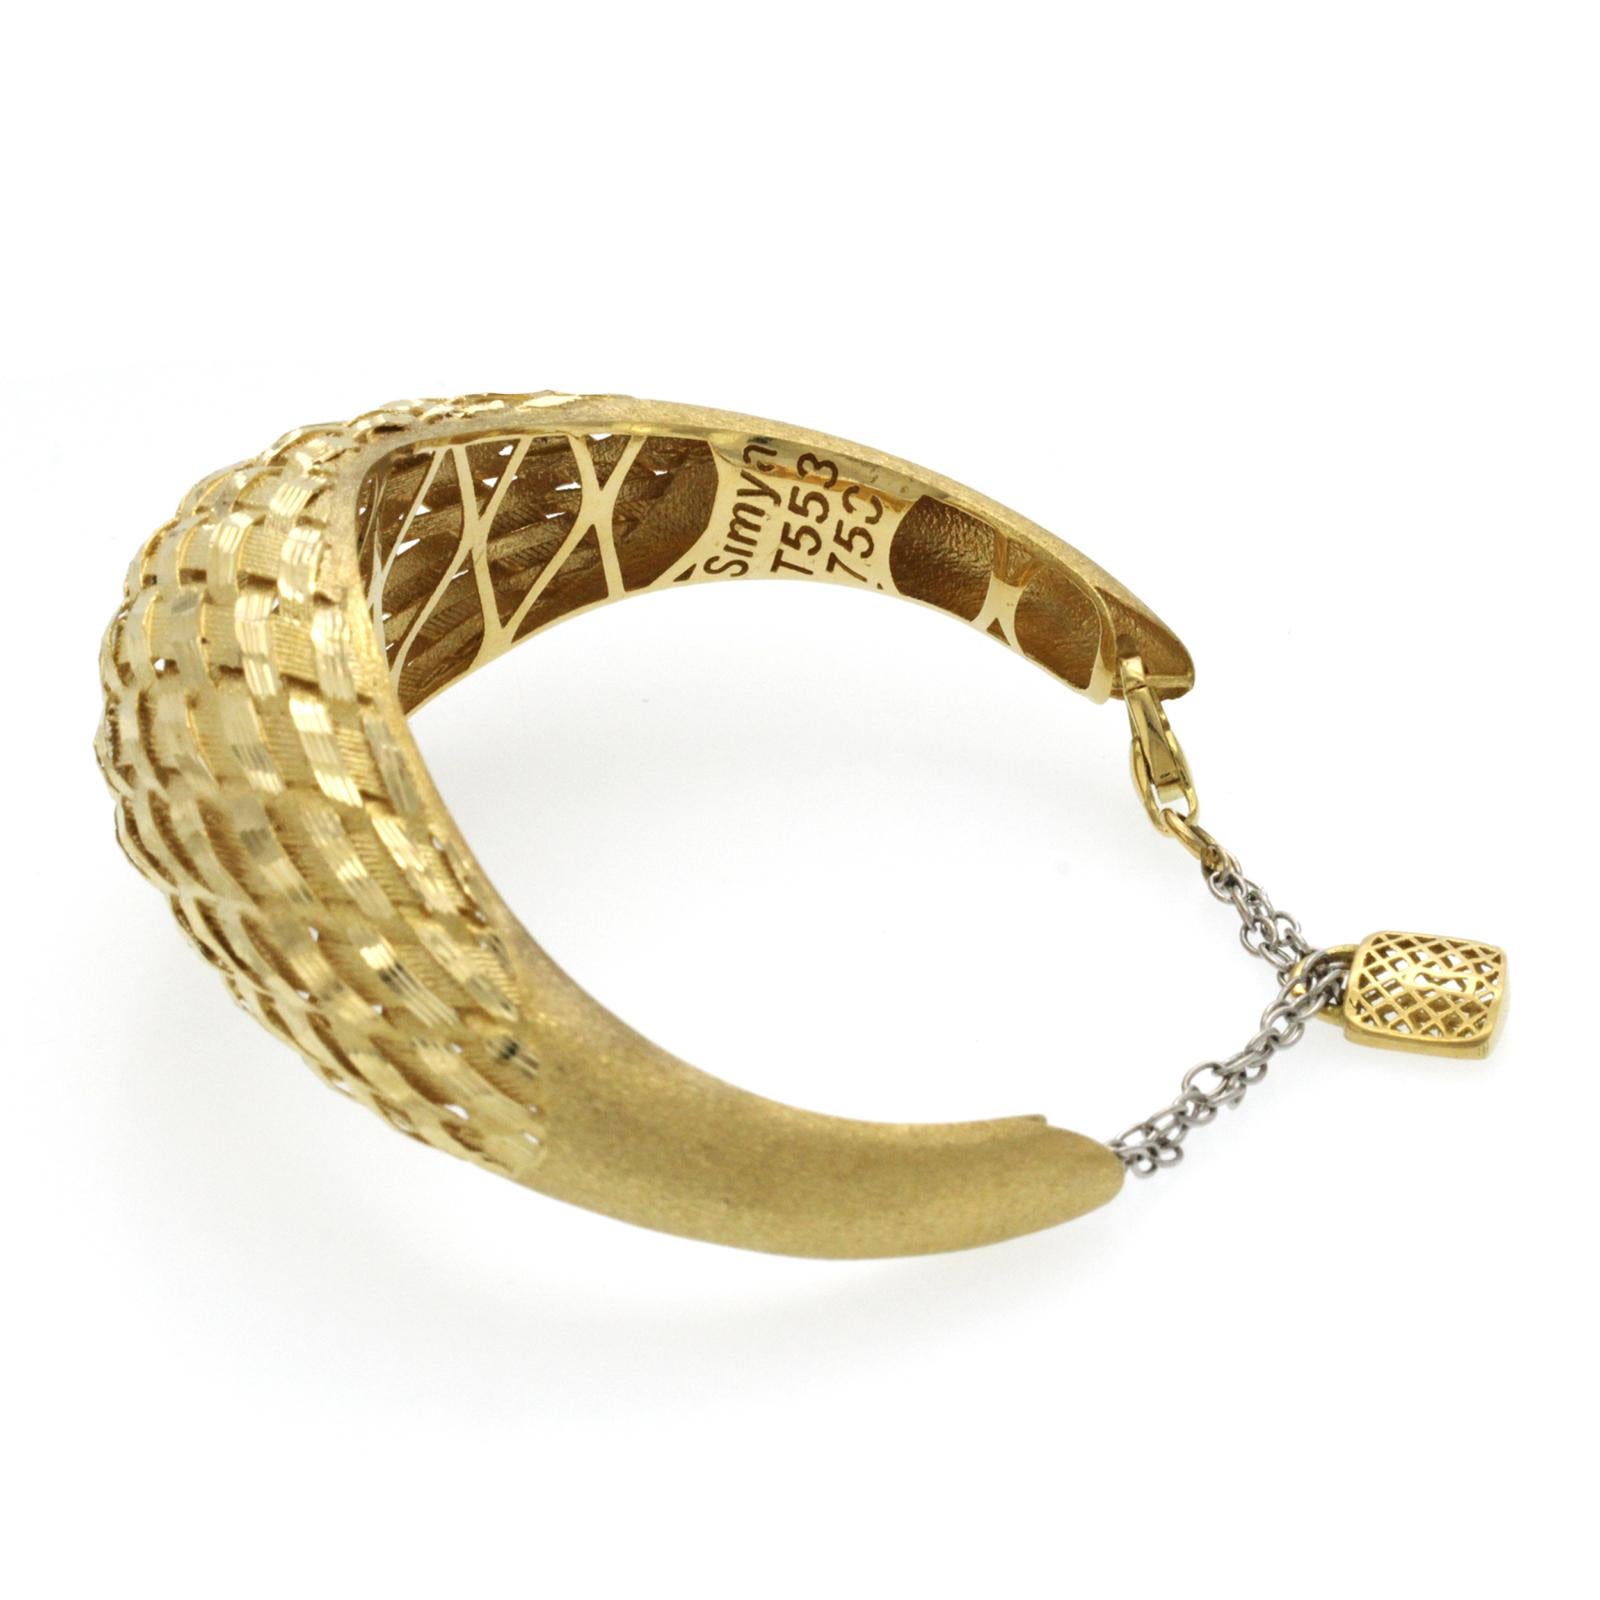 Signed Simya 18K Yellow Gold Diamond Cut Braided Cuff Bracelet In Excellent Condition For Sale In Los Angeles, CA